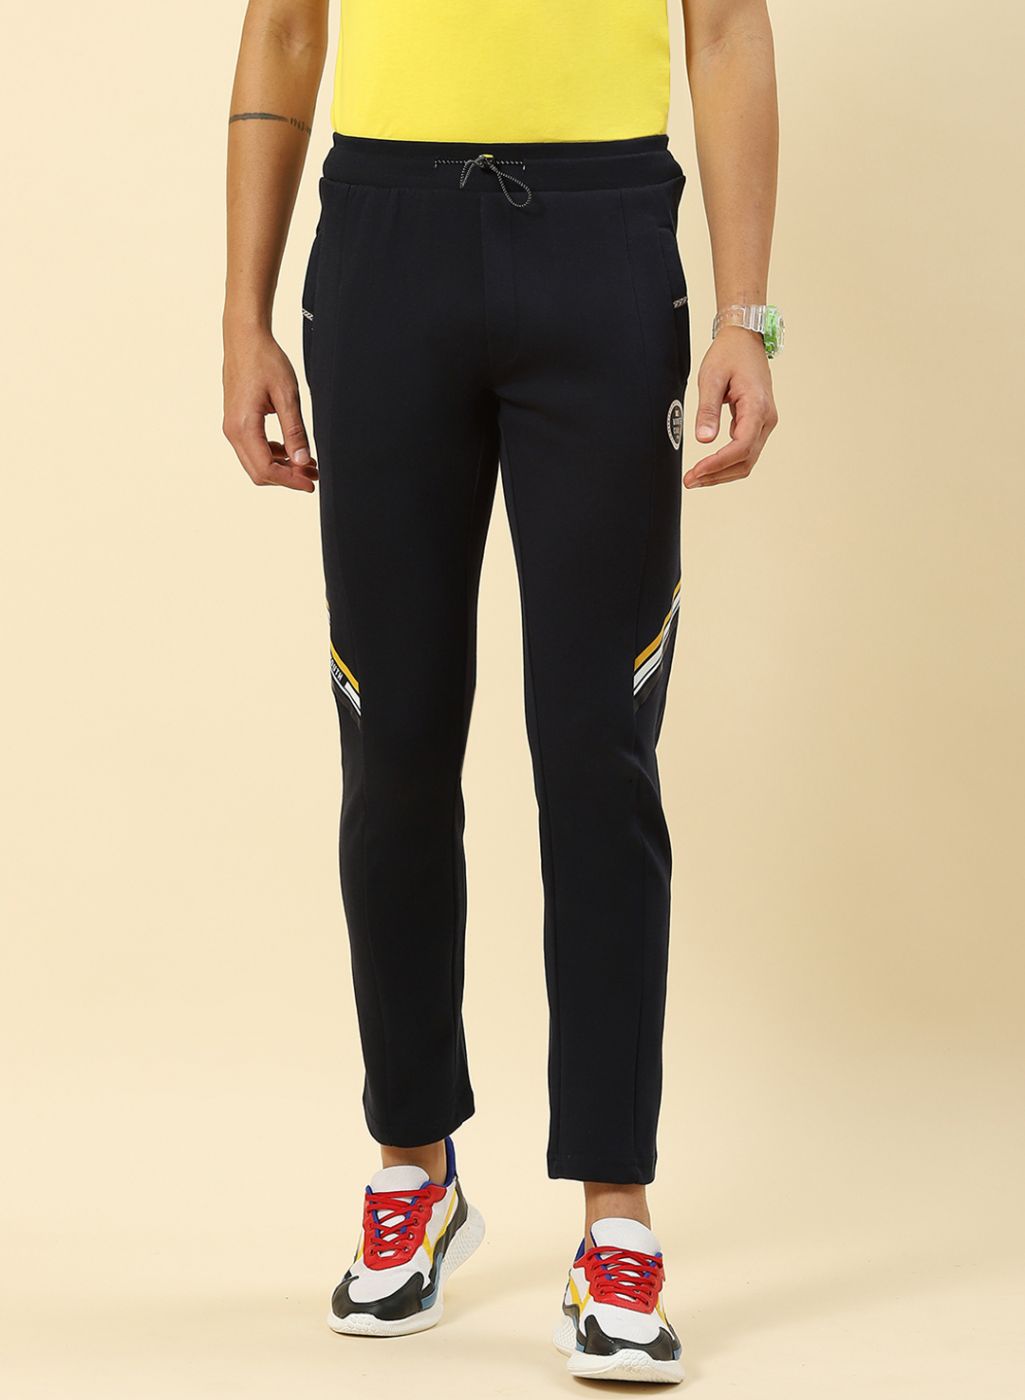 Track Pants Wholesale Dealers In Bangalore India | International Society of  Precision Agriculture